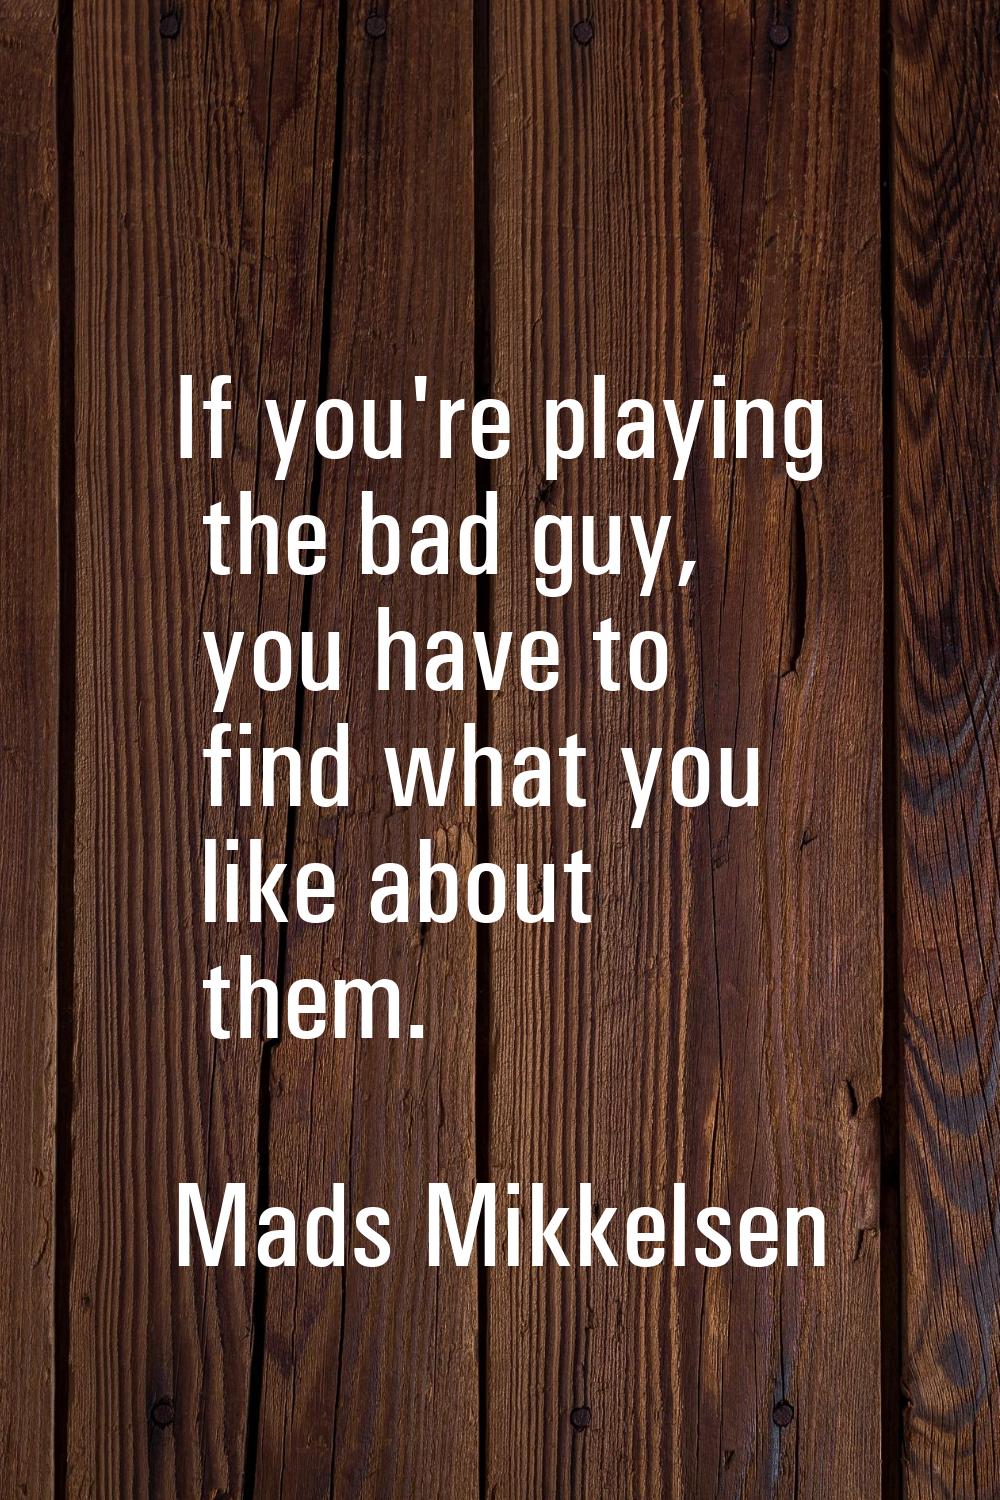 If you're playing the bad guy, you have to find what you like about them.